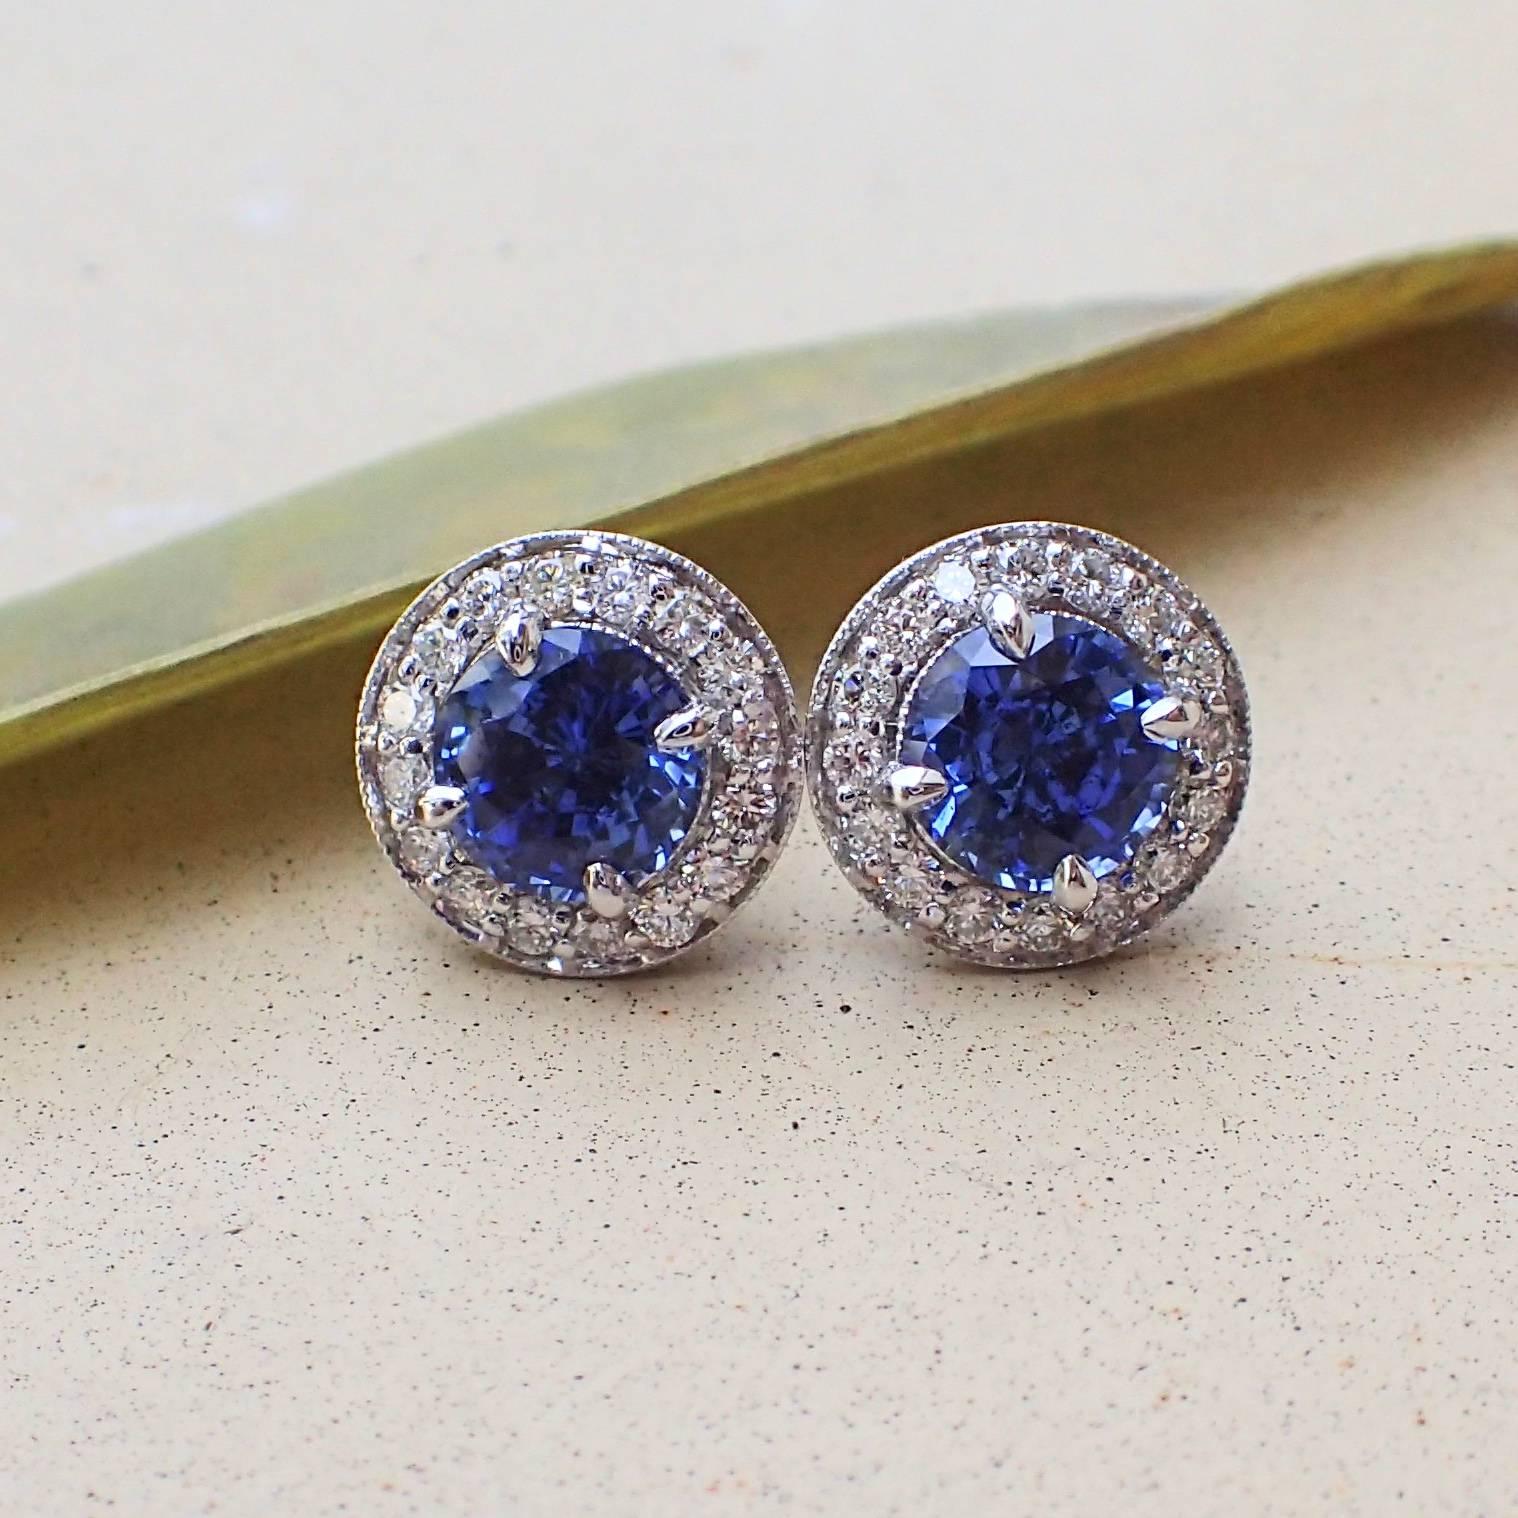 Round Cut 18k Earrings: 2.21 carats Chatham-Created Blue Sapphire & 0.39 carats of Diamond